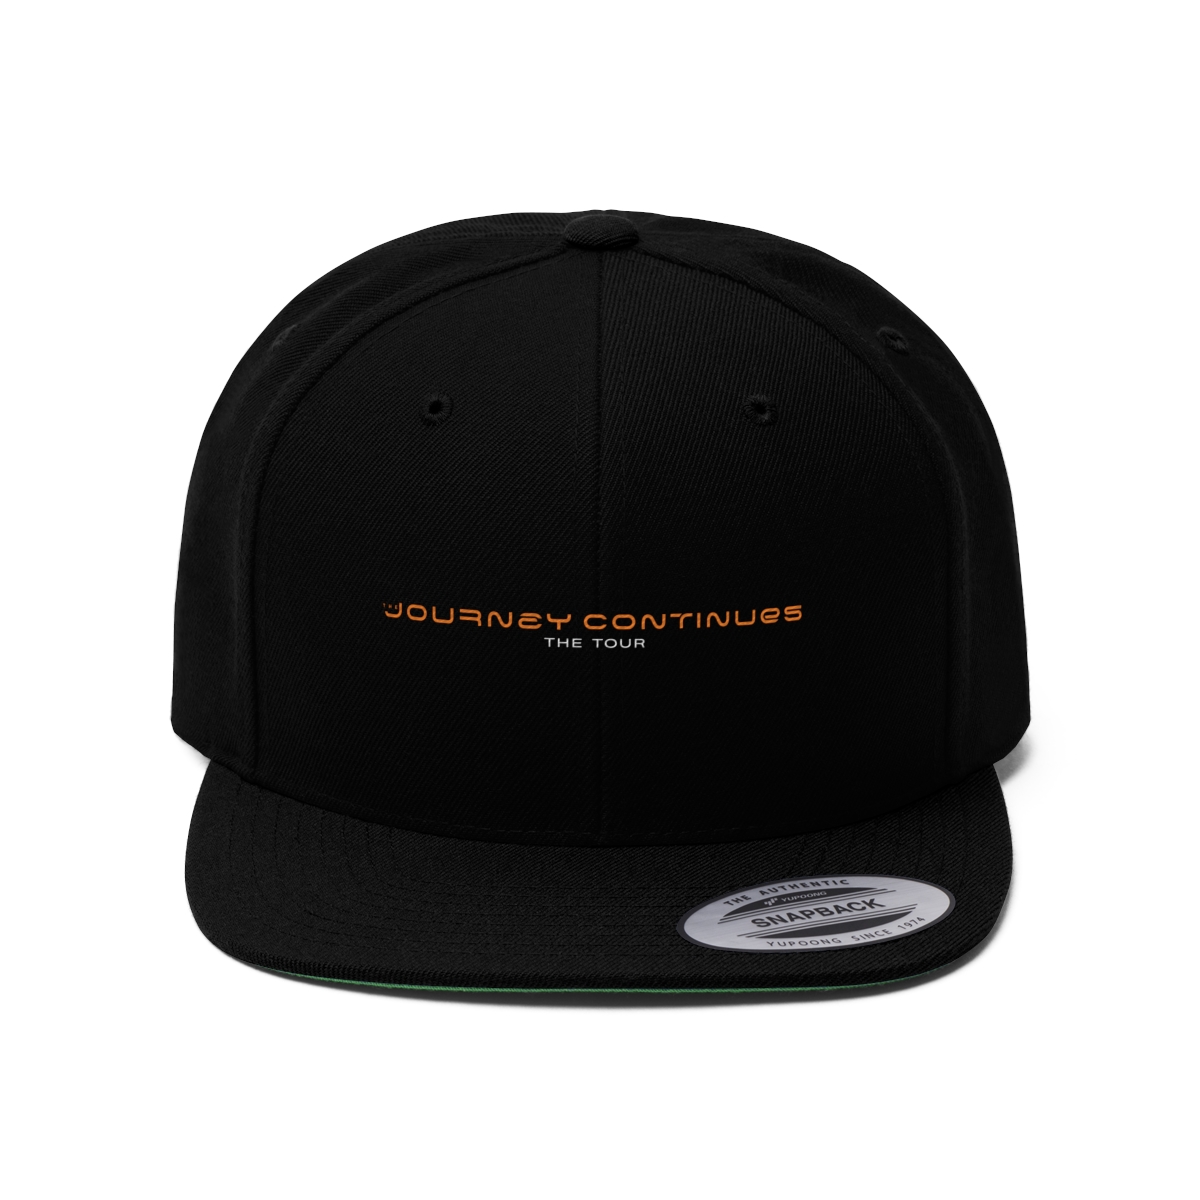 The Journey Continues Tour Snapback product thumbnail image